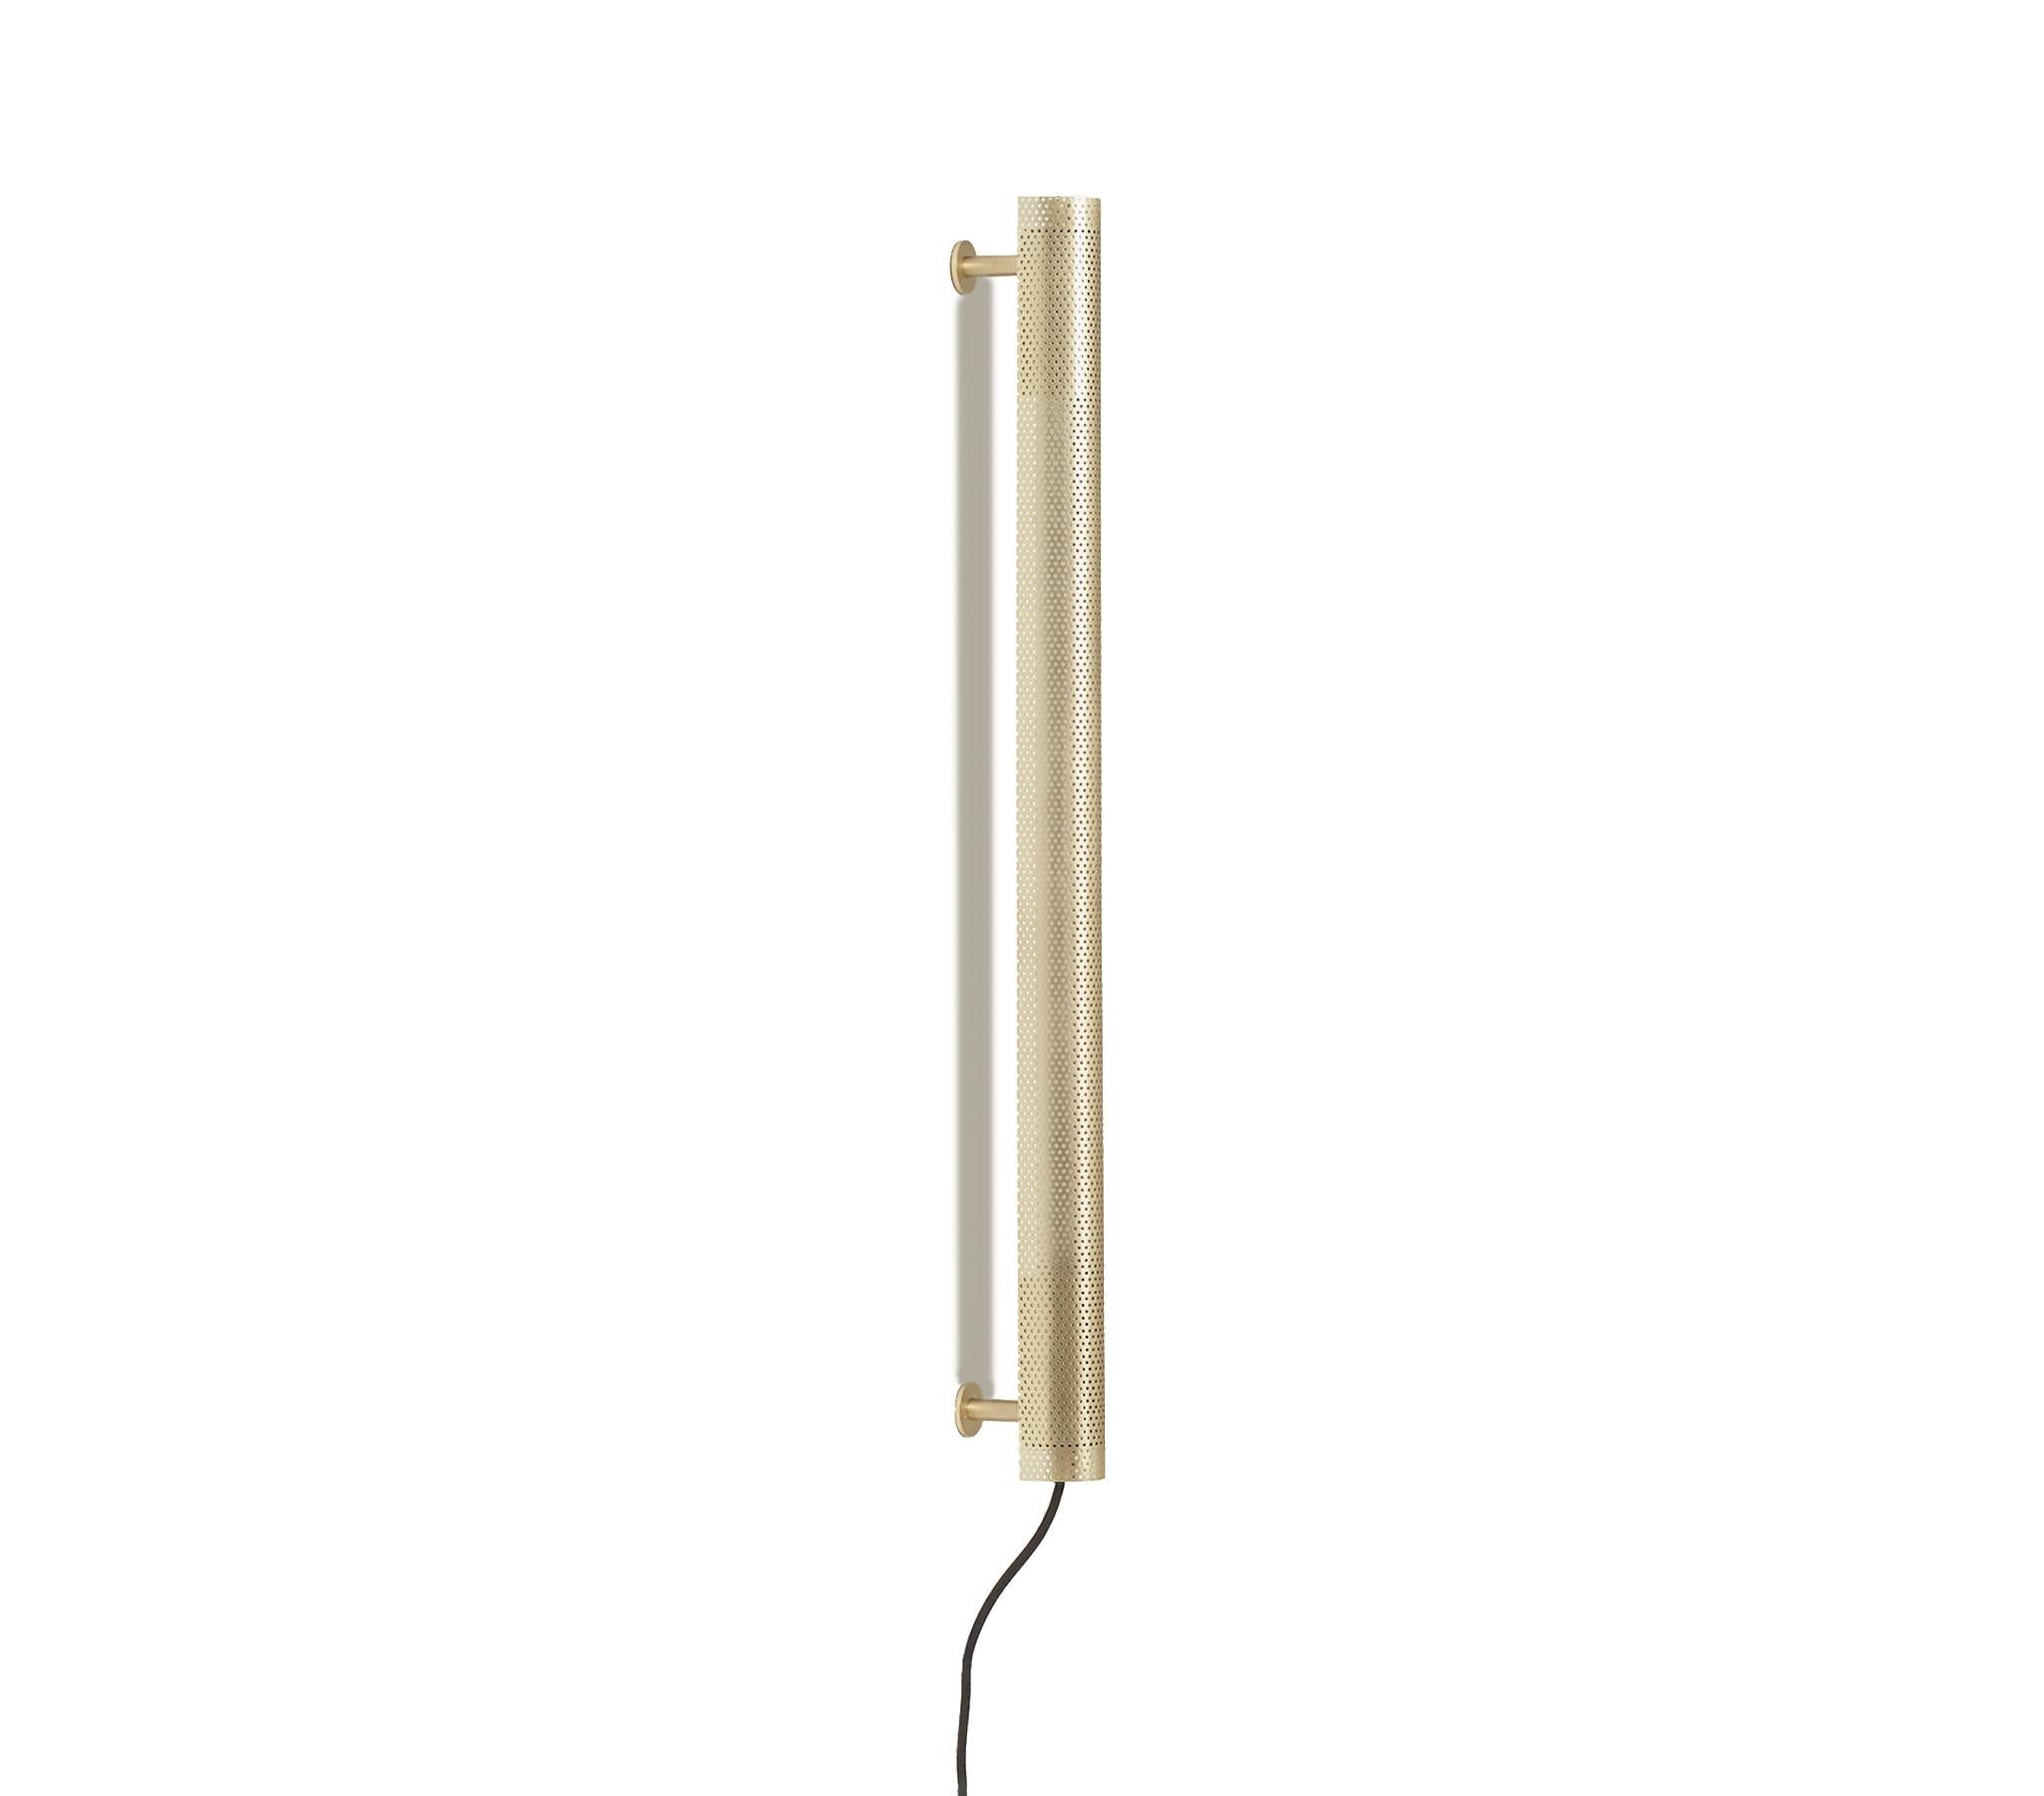 Radent wall lamp is based on a standard LED light and is a slim radiant linear wall lamp. The Radent Wall Lamp is available in two sizes with a black, white or brass finish. Measures: 70mm.